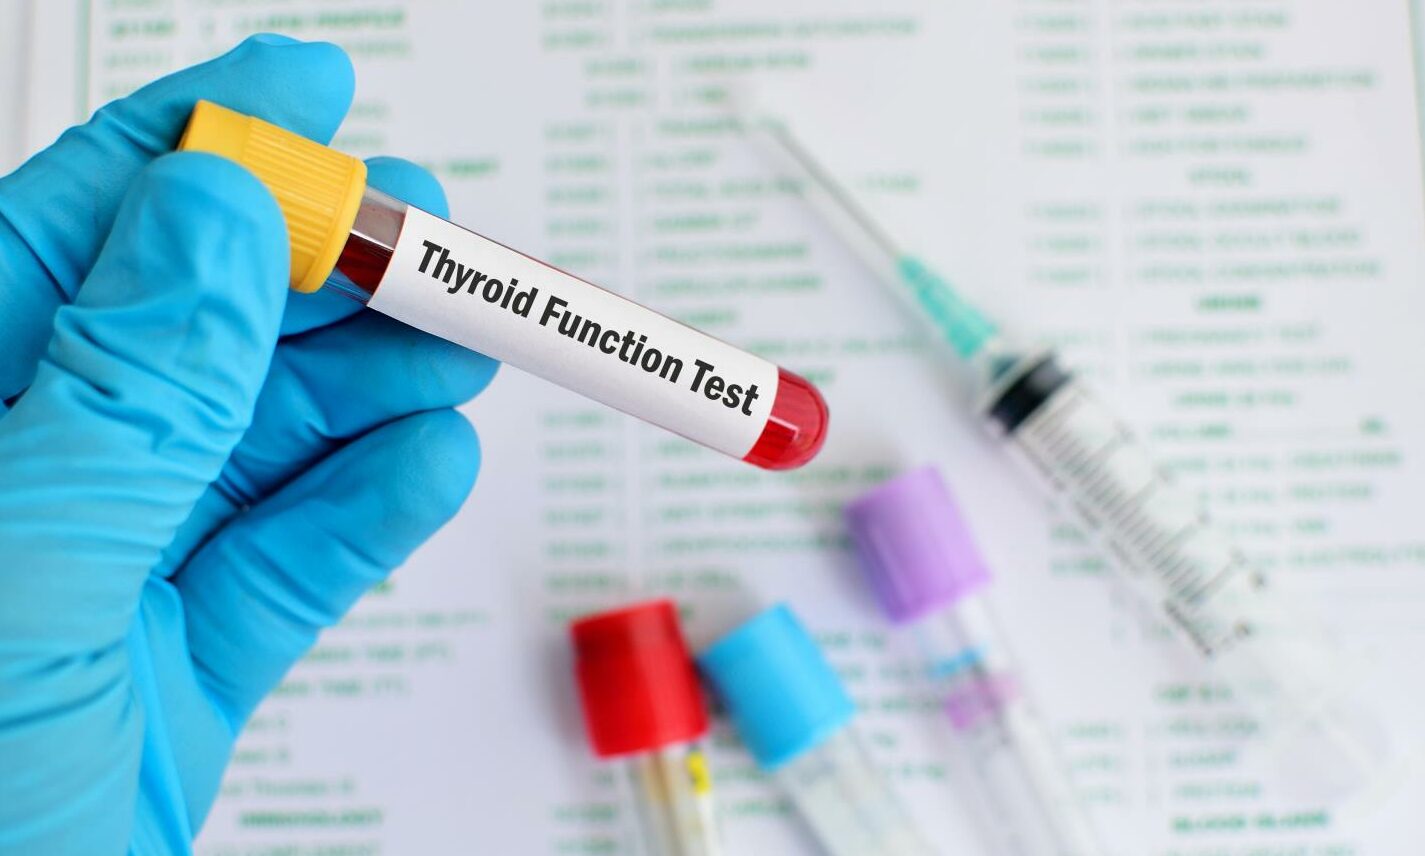 Blood sample for thyroid function test